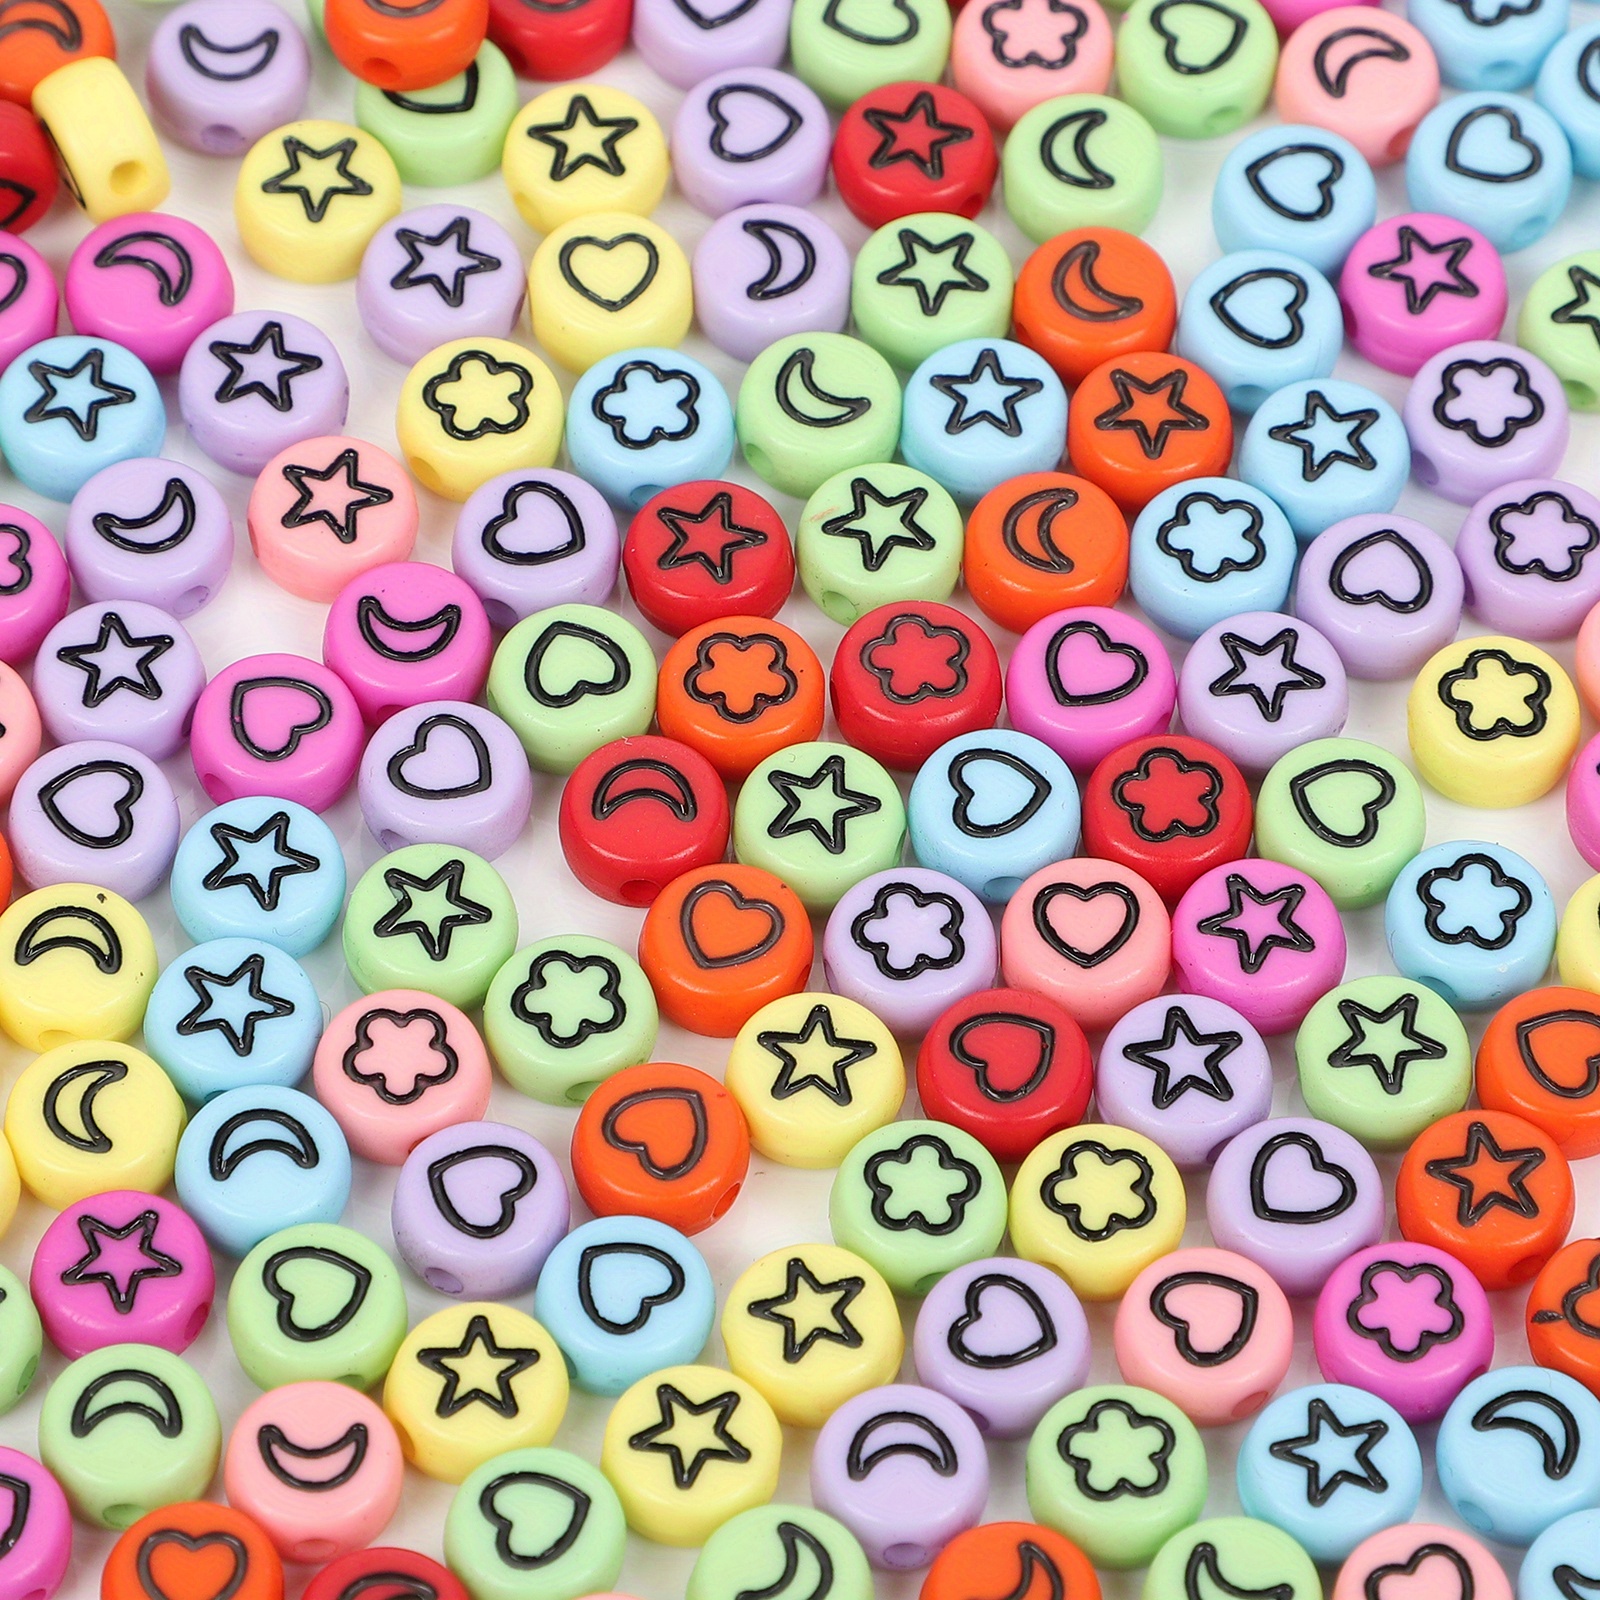 100 Pieces Small Heart Star Flower Bowtie Round Shaped Plastic Charms Beads Flatback Cabochons Embellishment for Jewelry Making Cardmaking Scrapbook